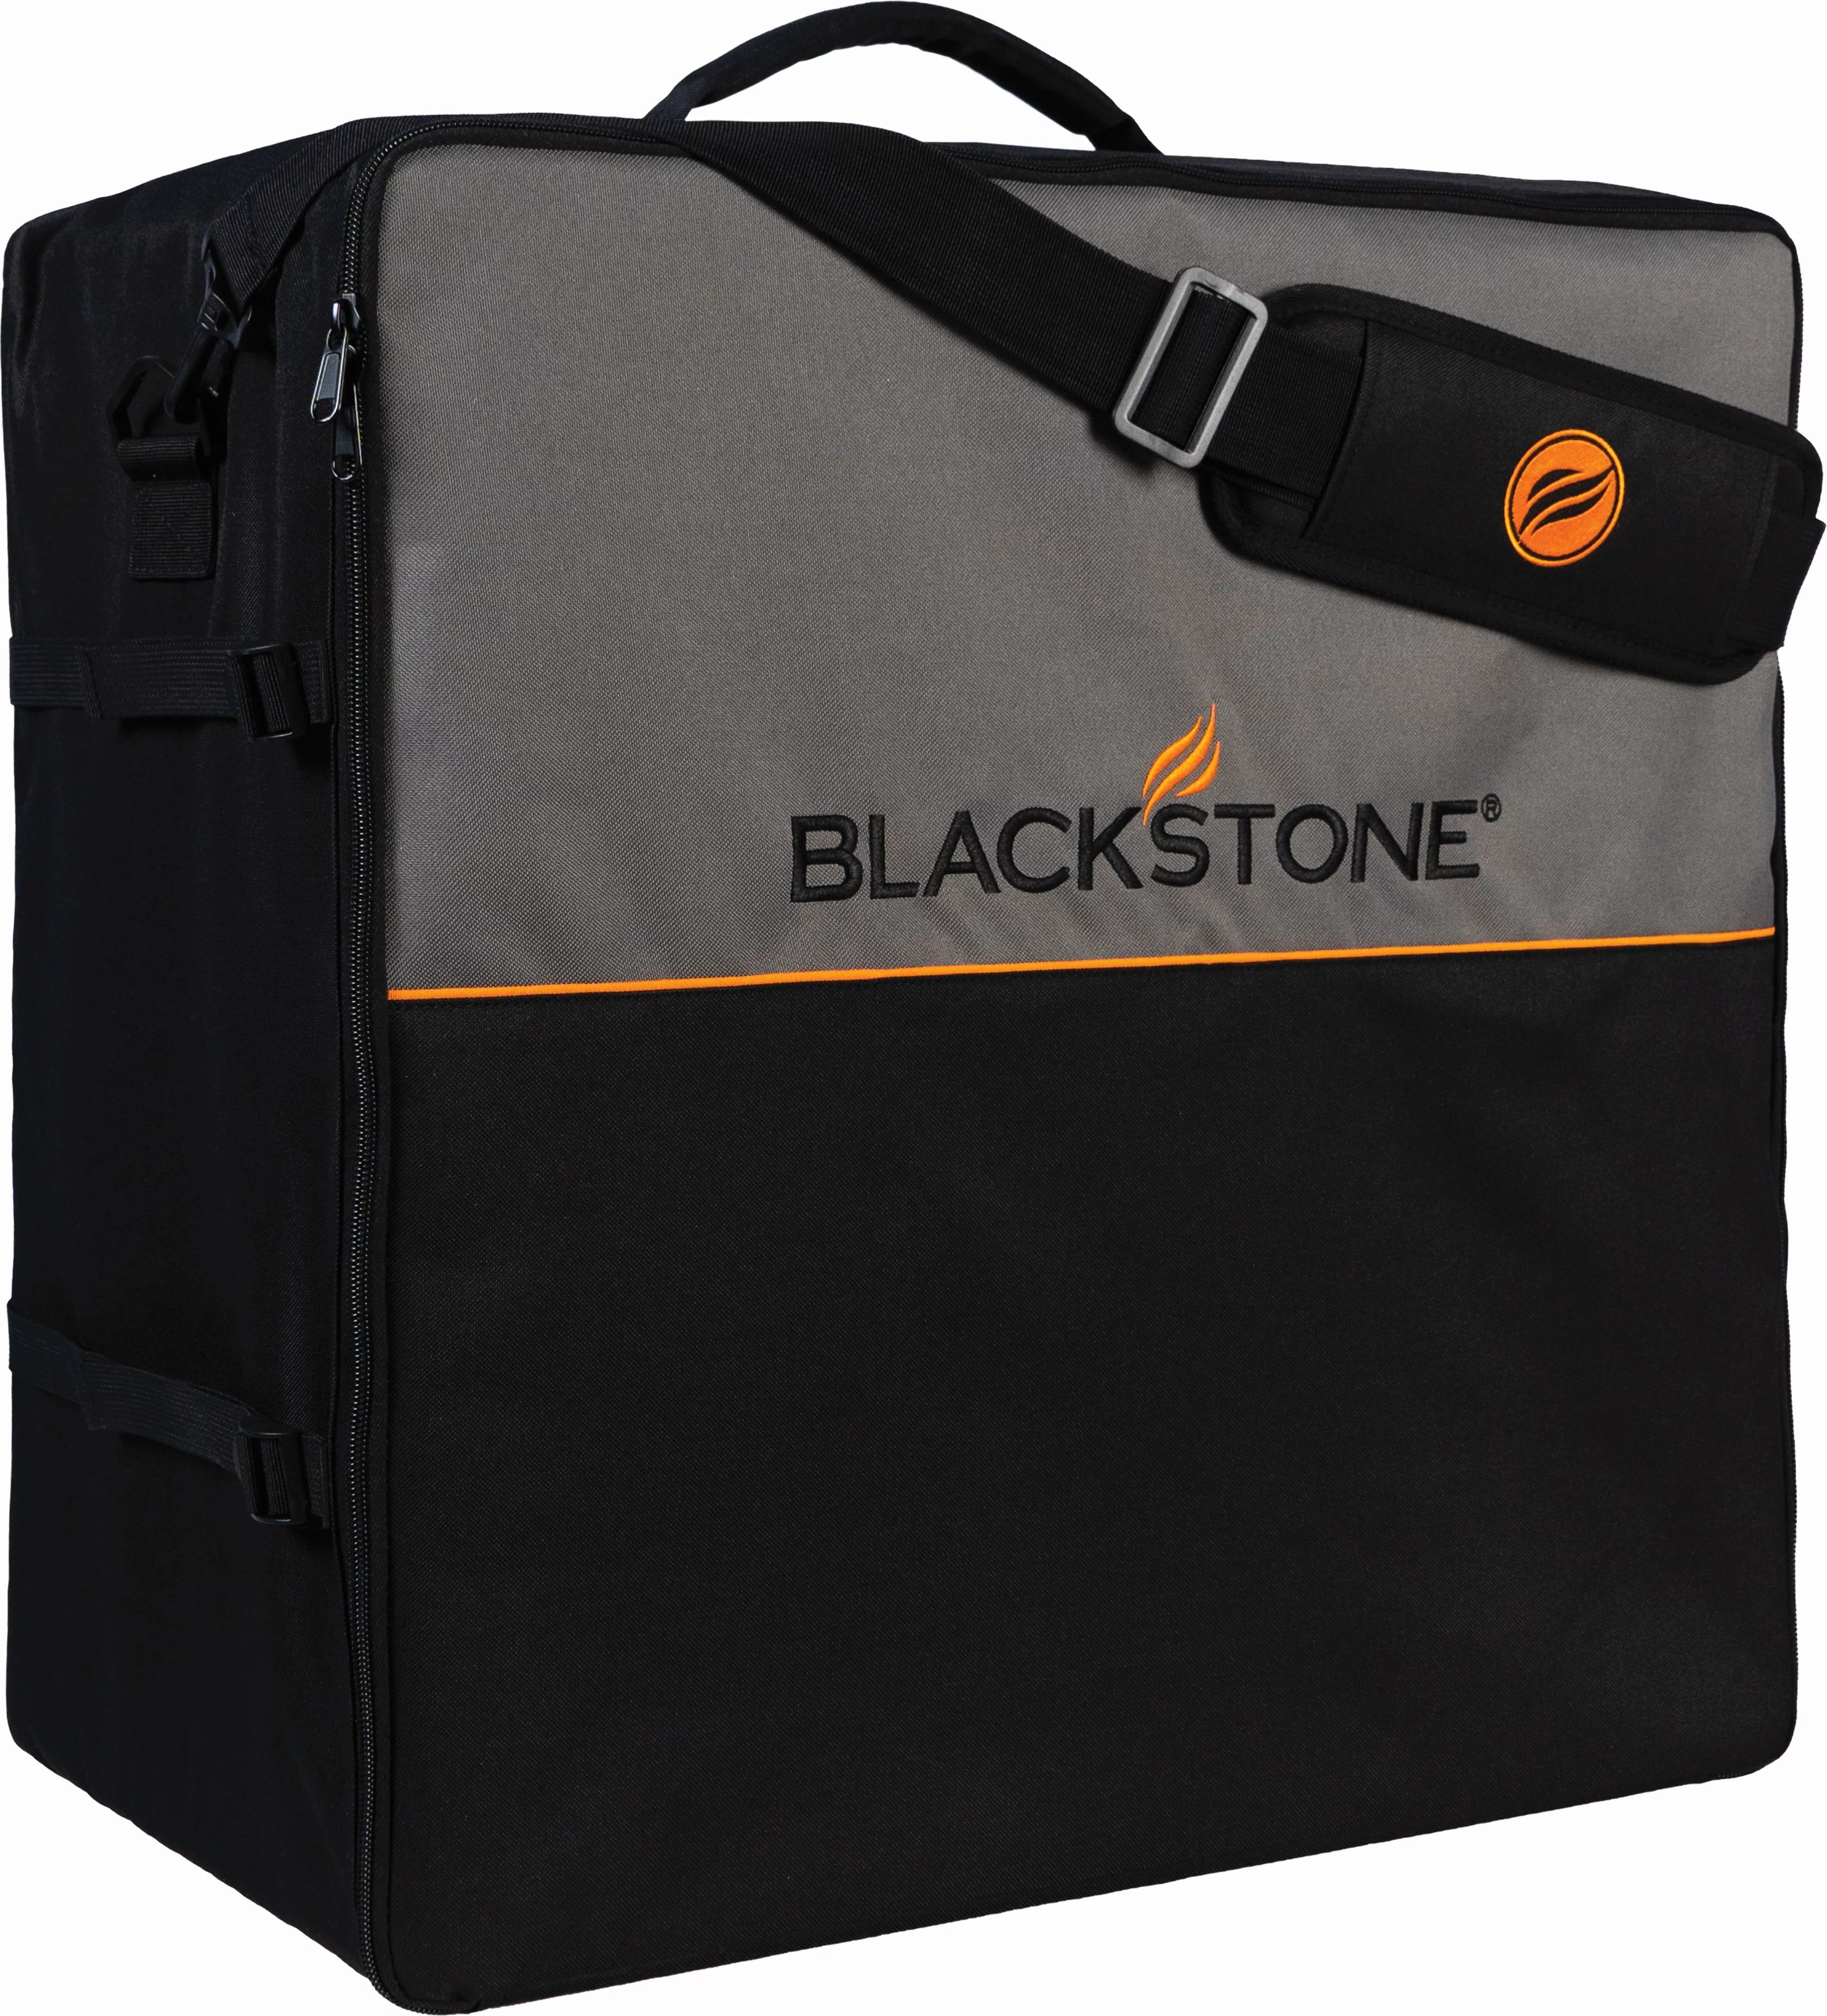 Blackstone Heavy Duty 22" Tabletop Griddle Carry Bag with Adjust Strap | Walmart (US)